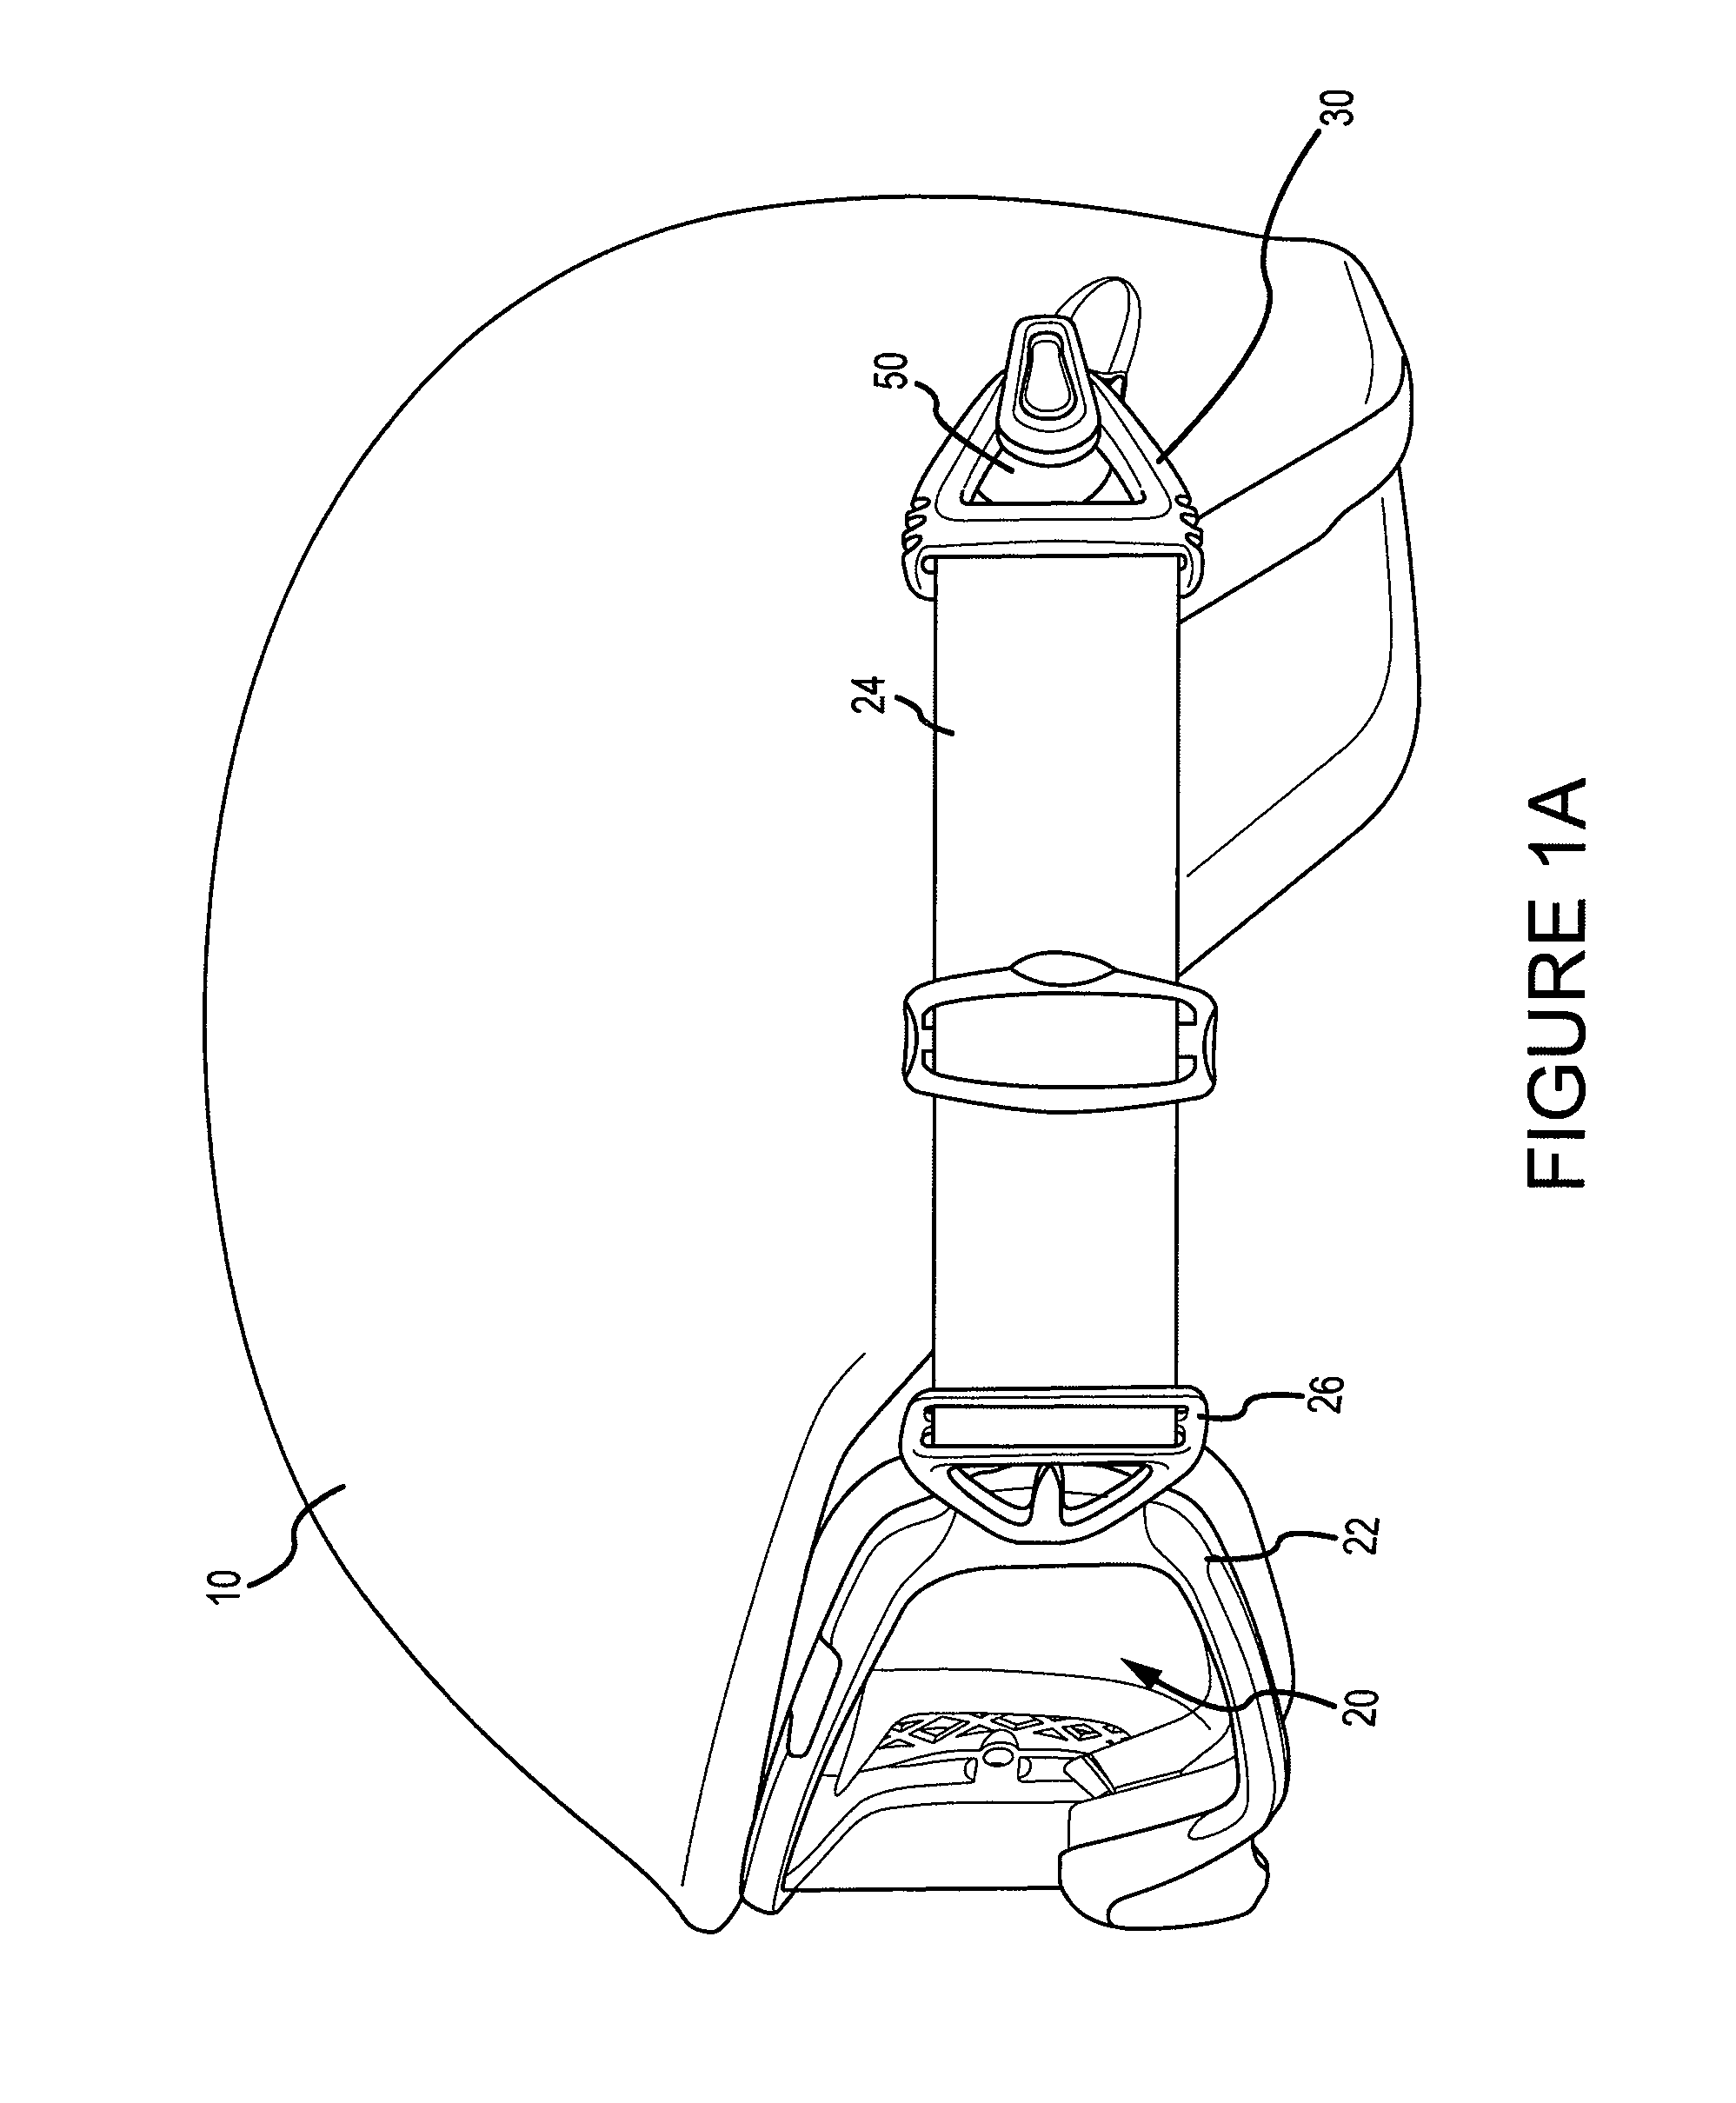 Goggle attachment system for a protective helmet